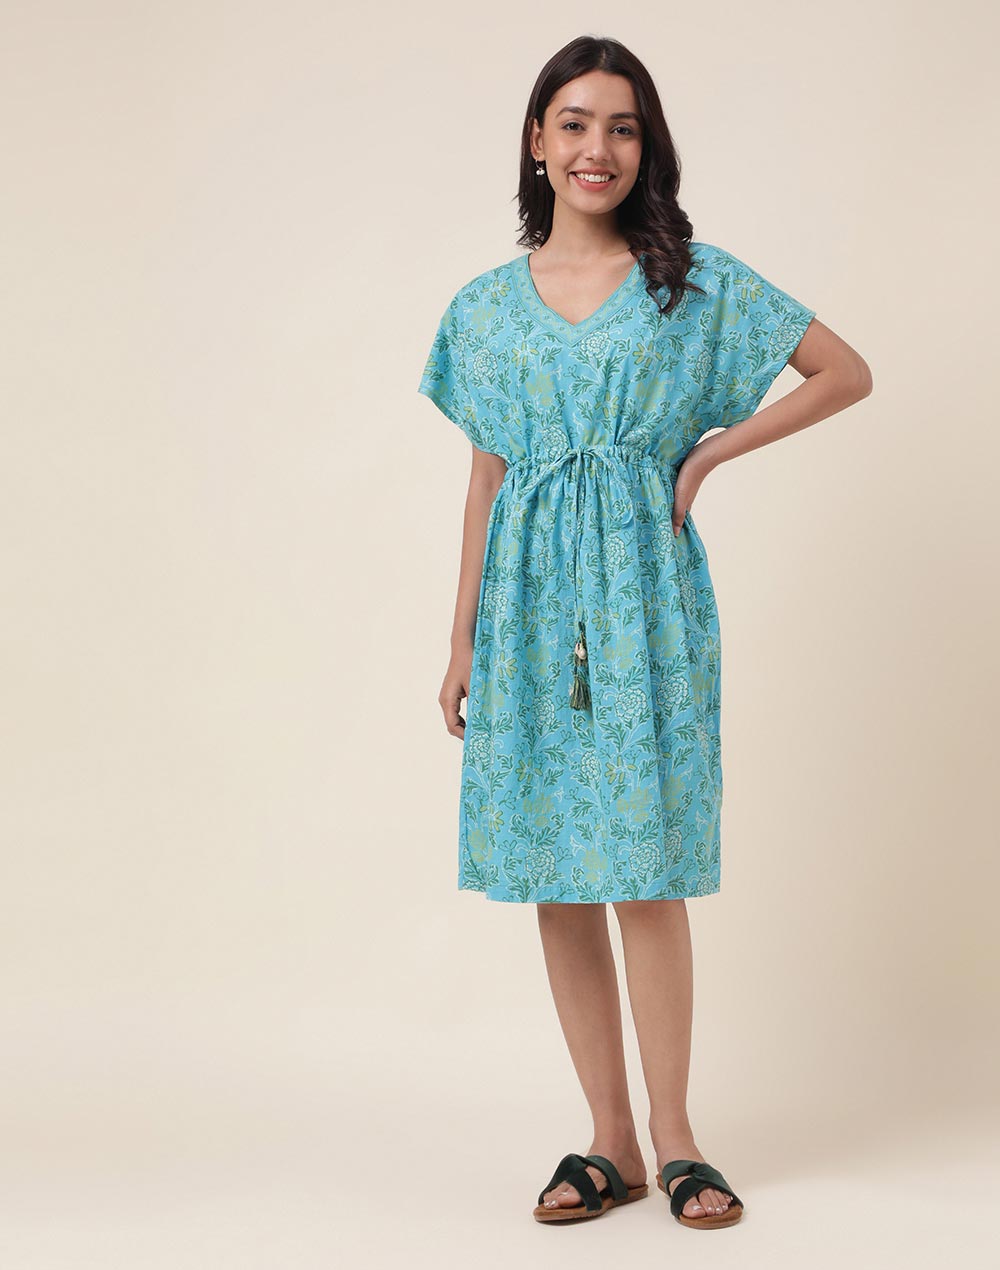 Buy Blue Cotton Printed Short Dress for Women Online at Fabindia | 20089423